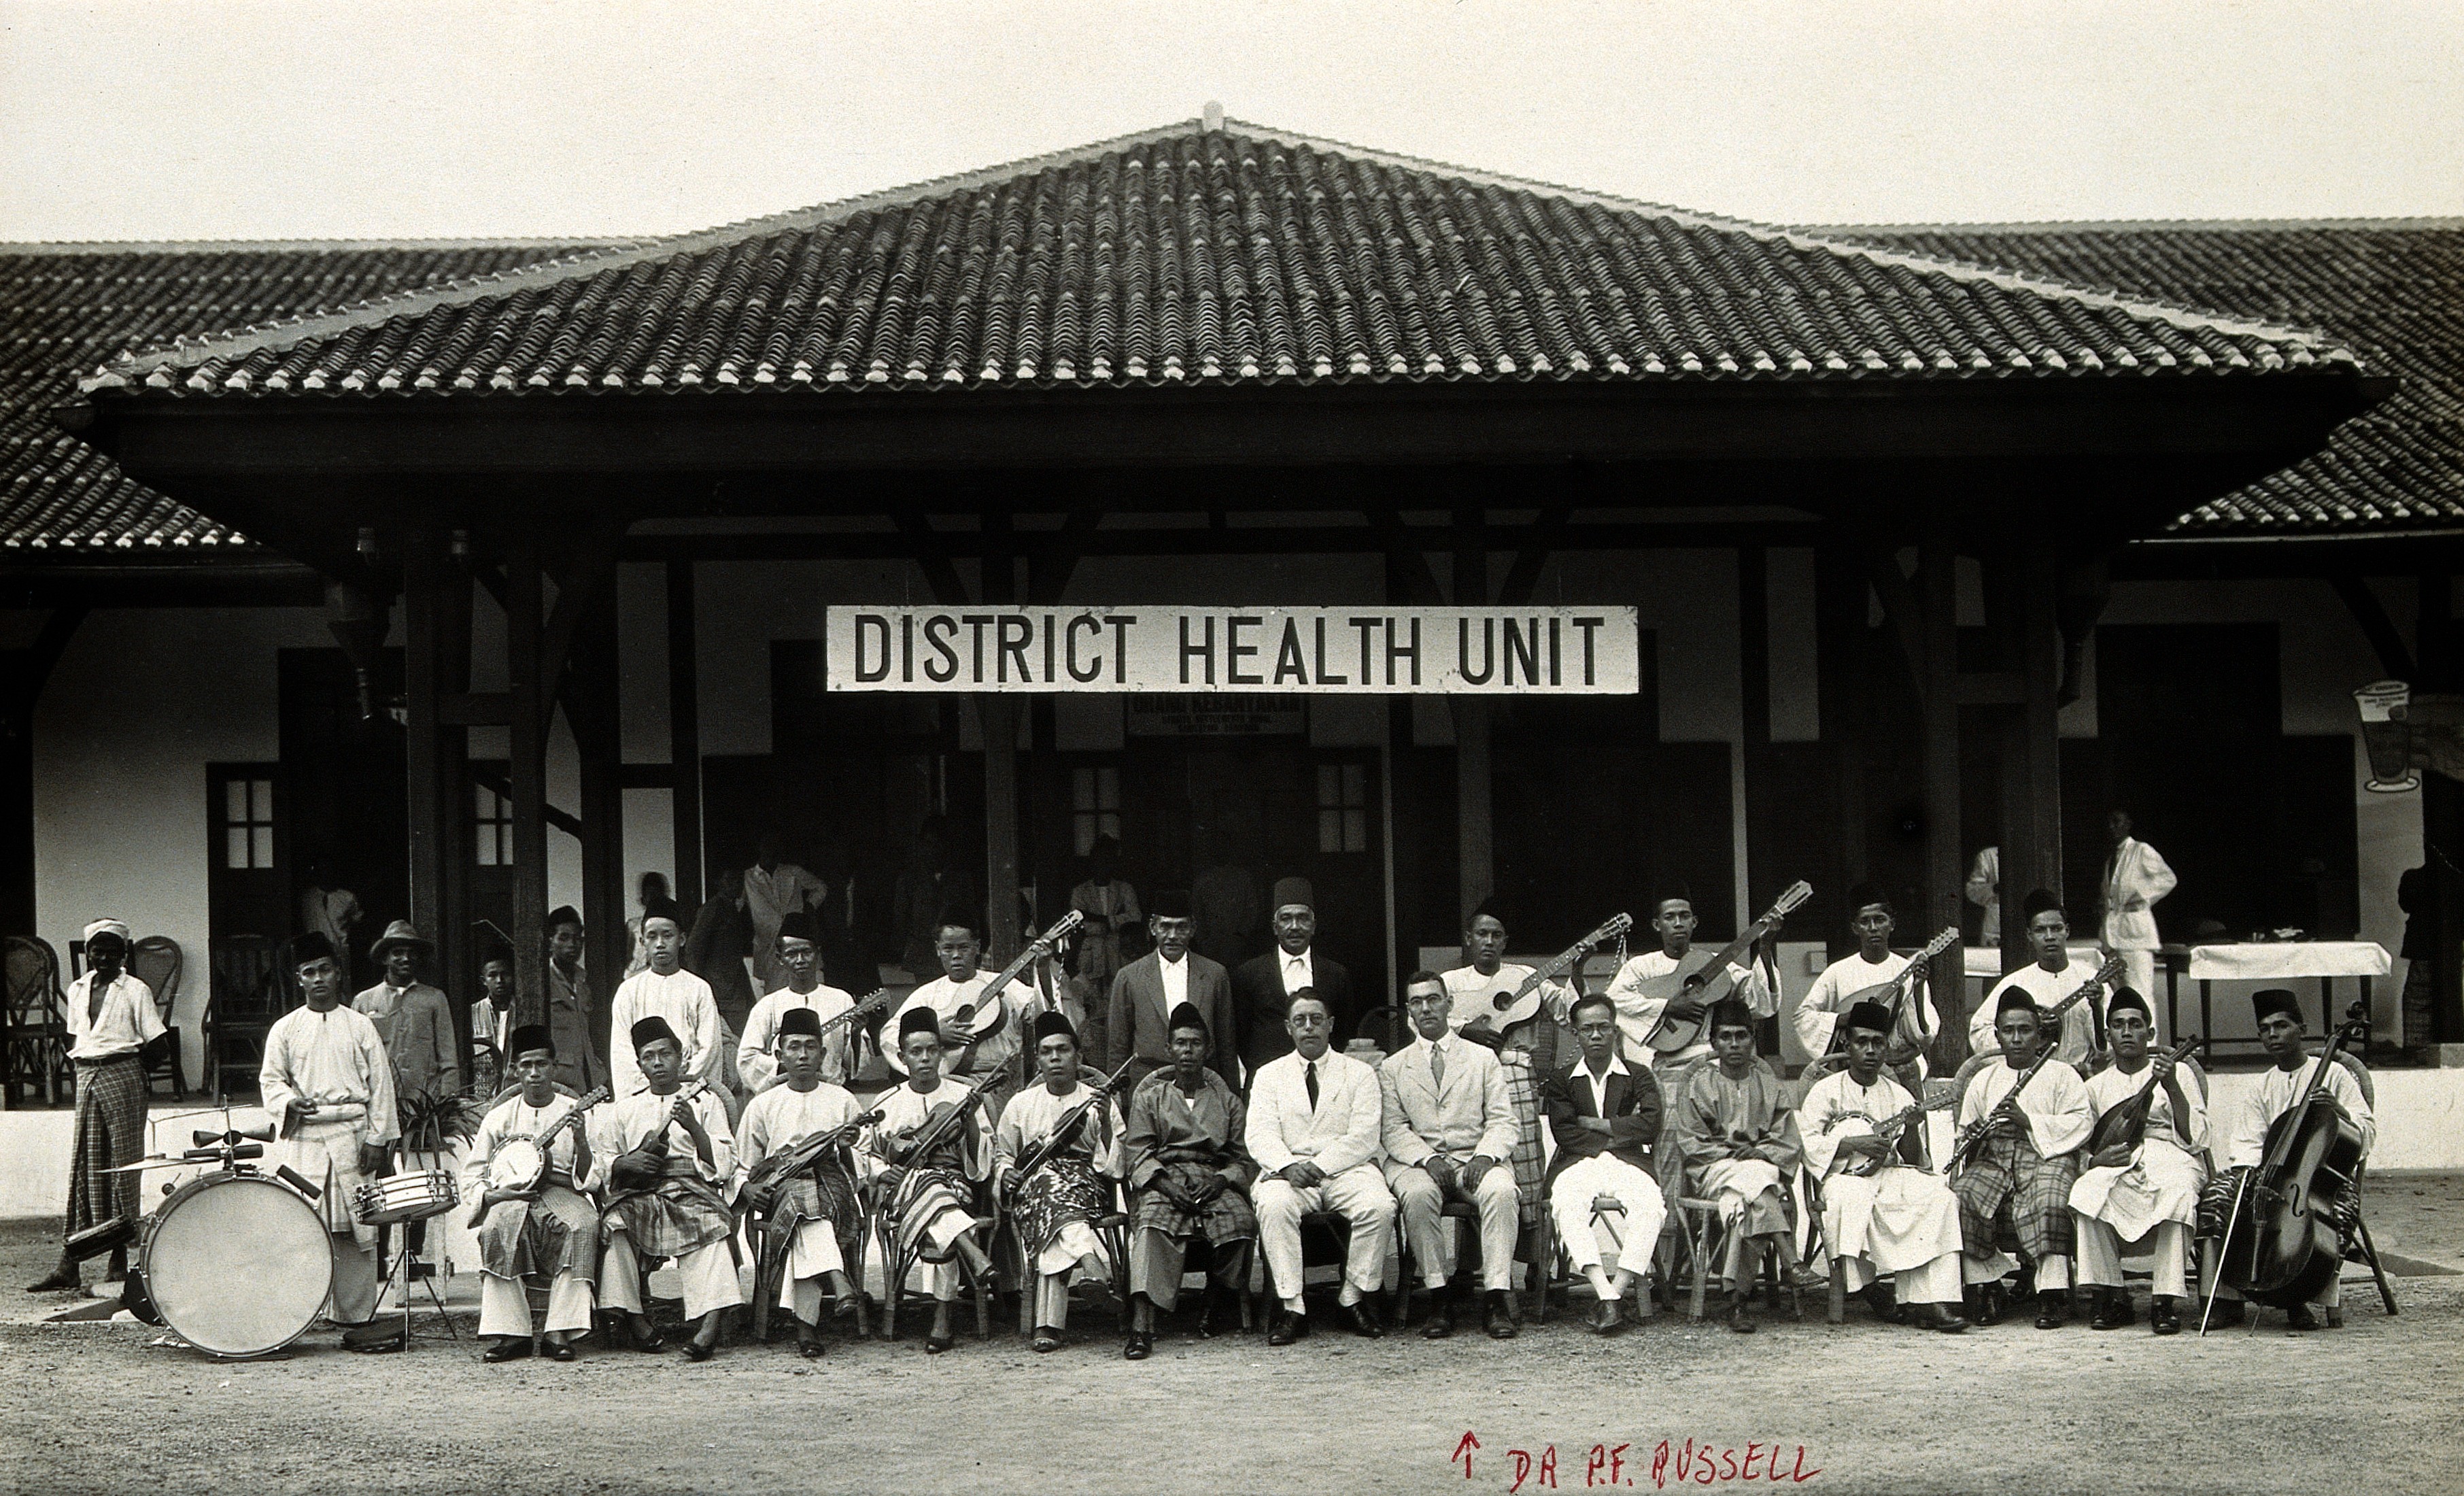 P.F. Russell and District Health Unit in Malaya. Photograph. Wellcome V0028070